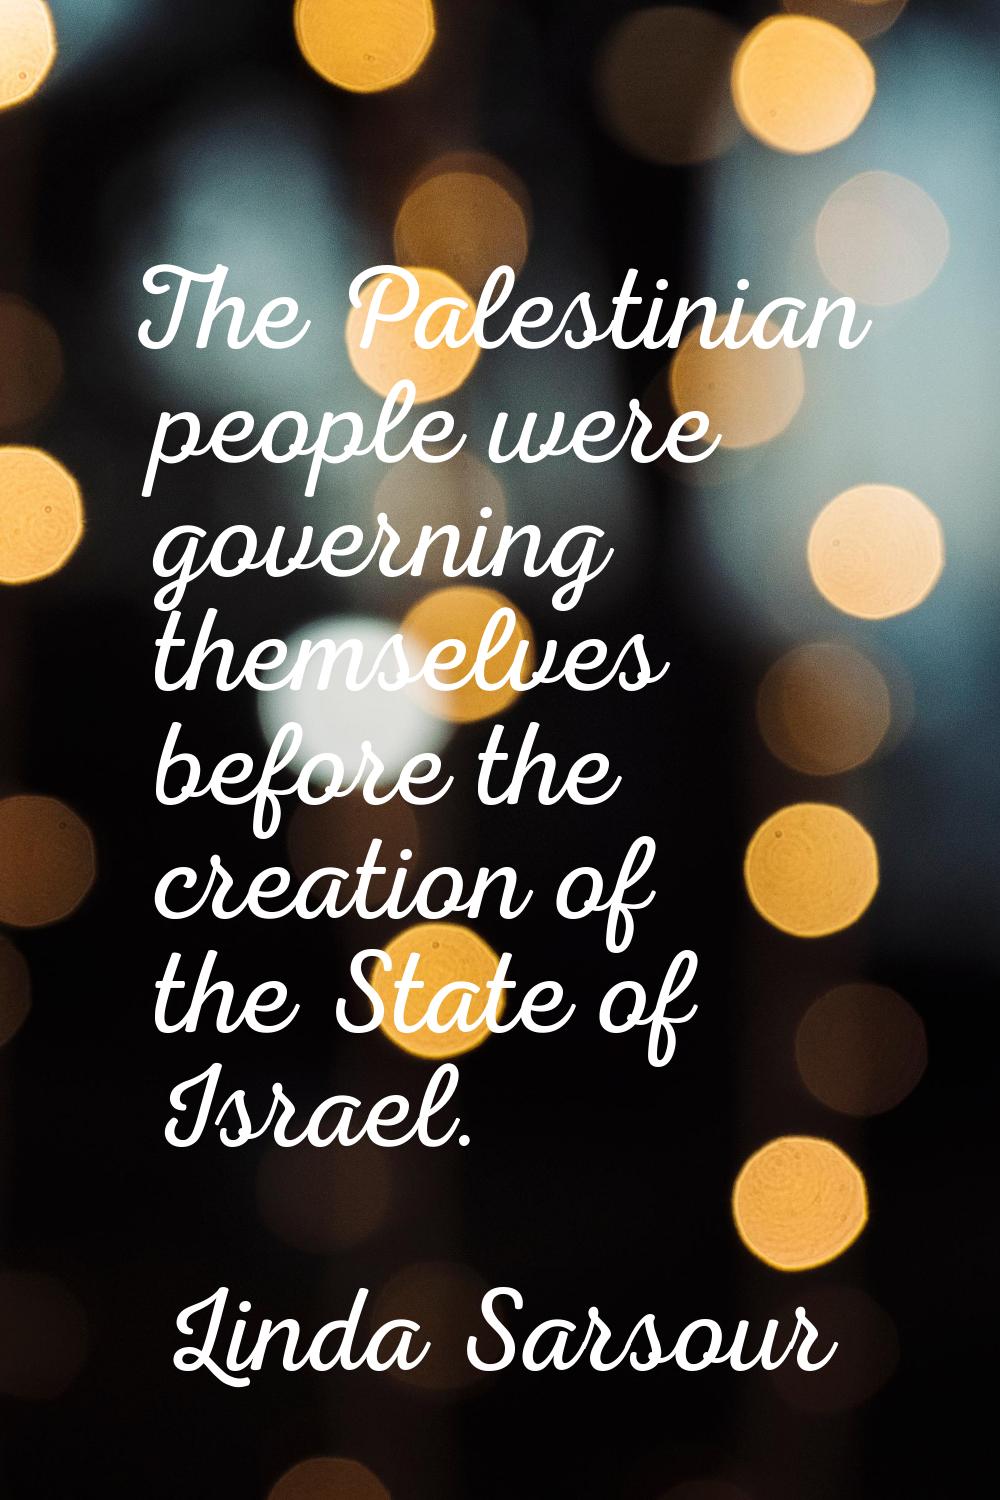 The Palestinian people were governing themselves before the creation of the State of Israel.